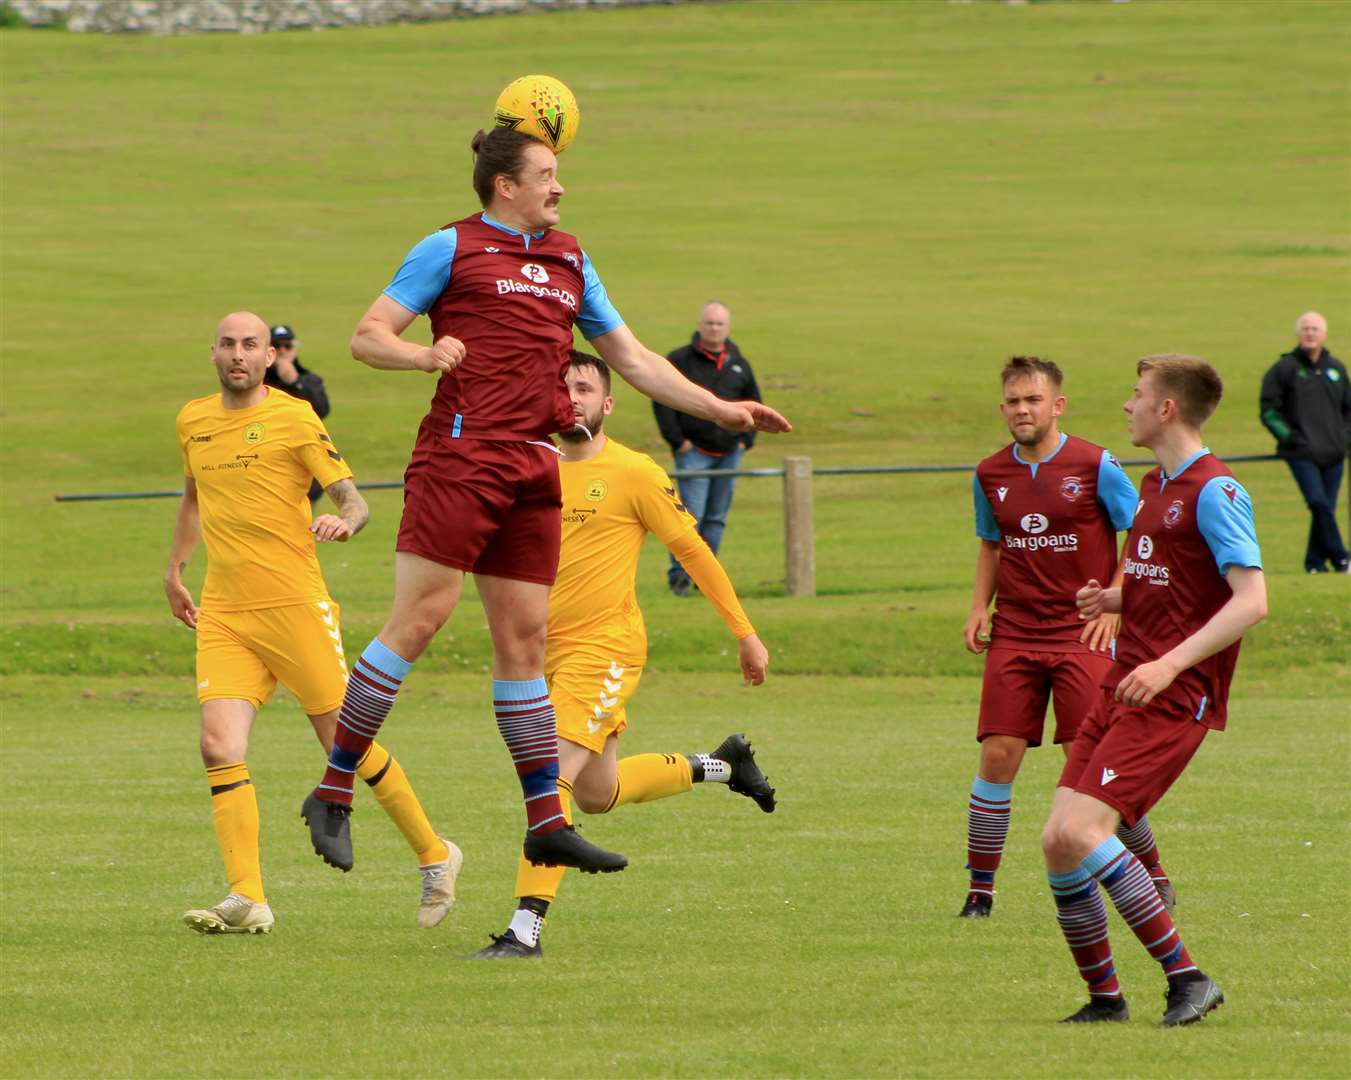 Pentland United defender James McLean gets his head to a high ball.